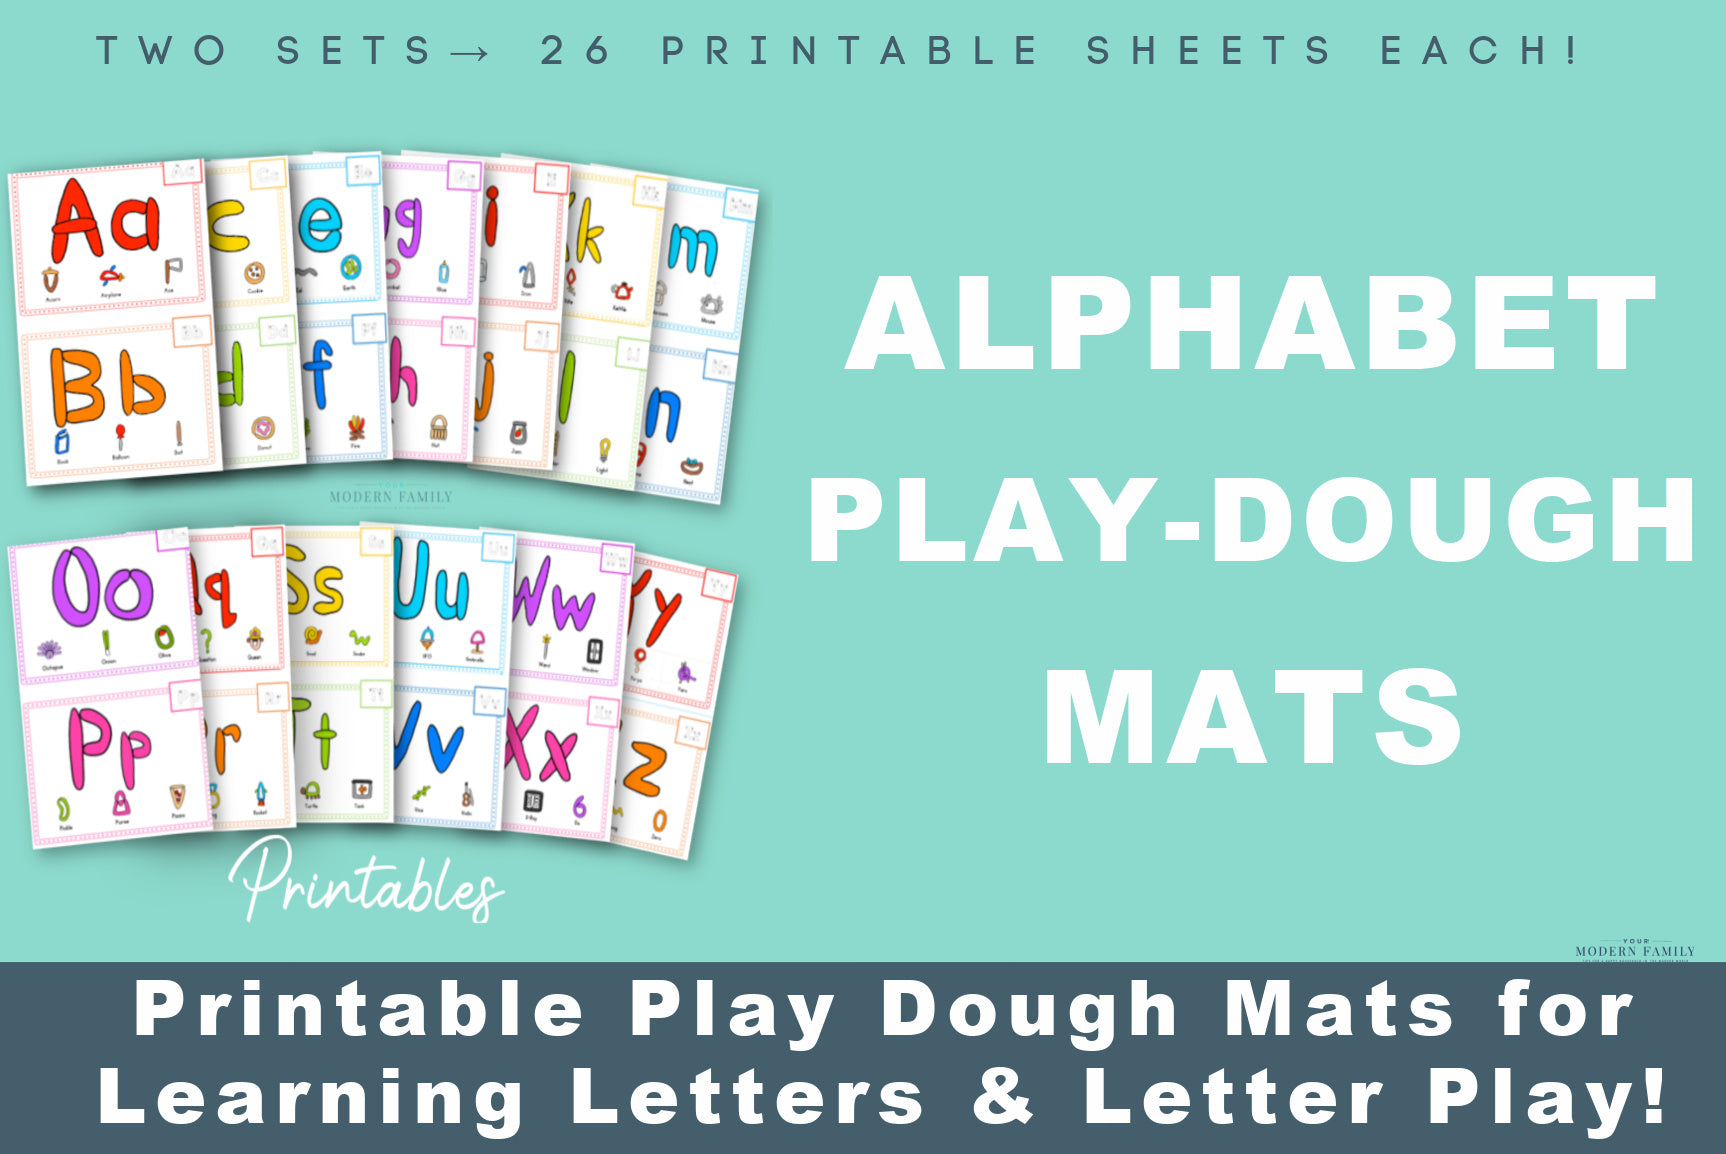 Printable Alphabet Play Dough Mats - Learn the ABC's with Play-Doh! ABC  Play dough mats are great for preschoolers or kindergarteners! - Your  Modern Family Shop